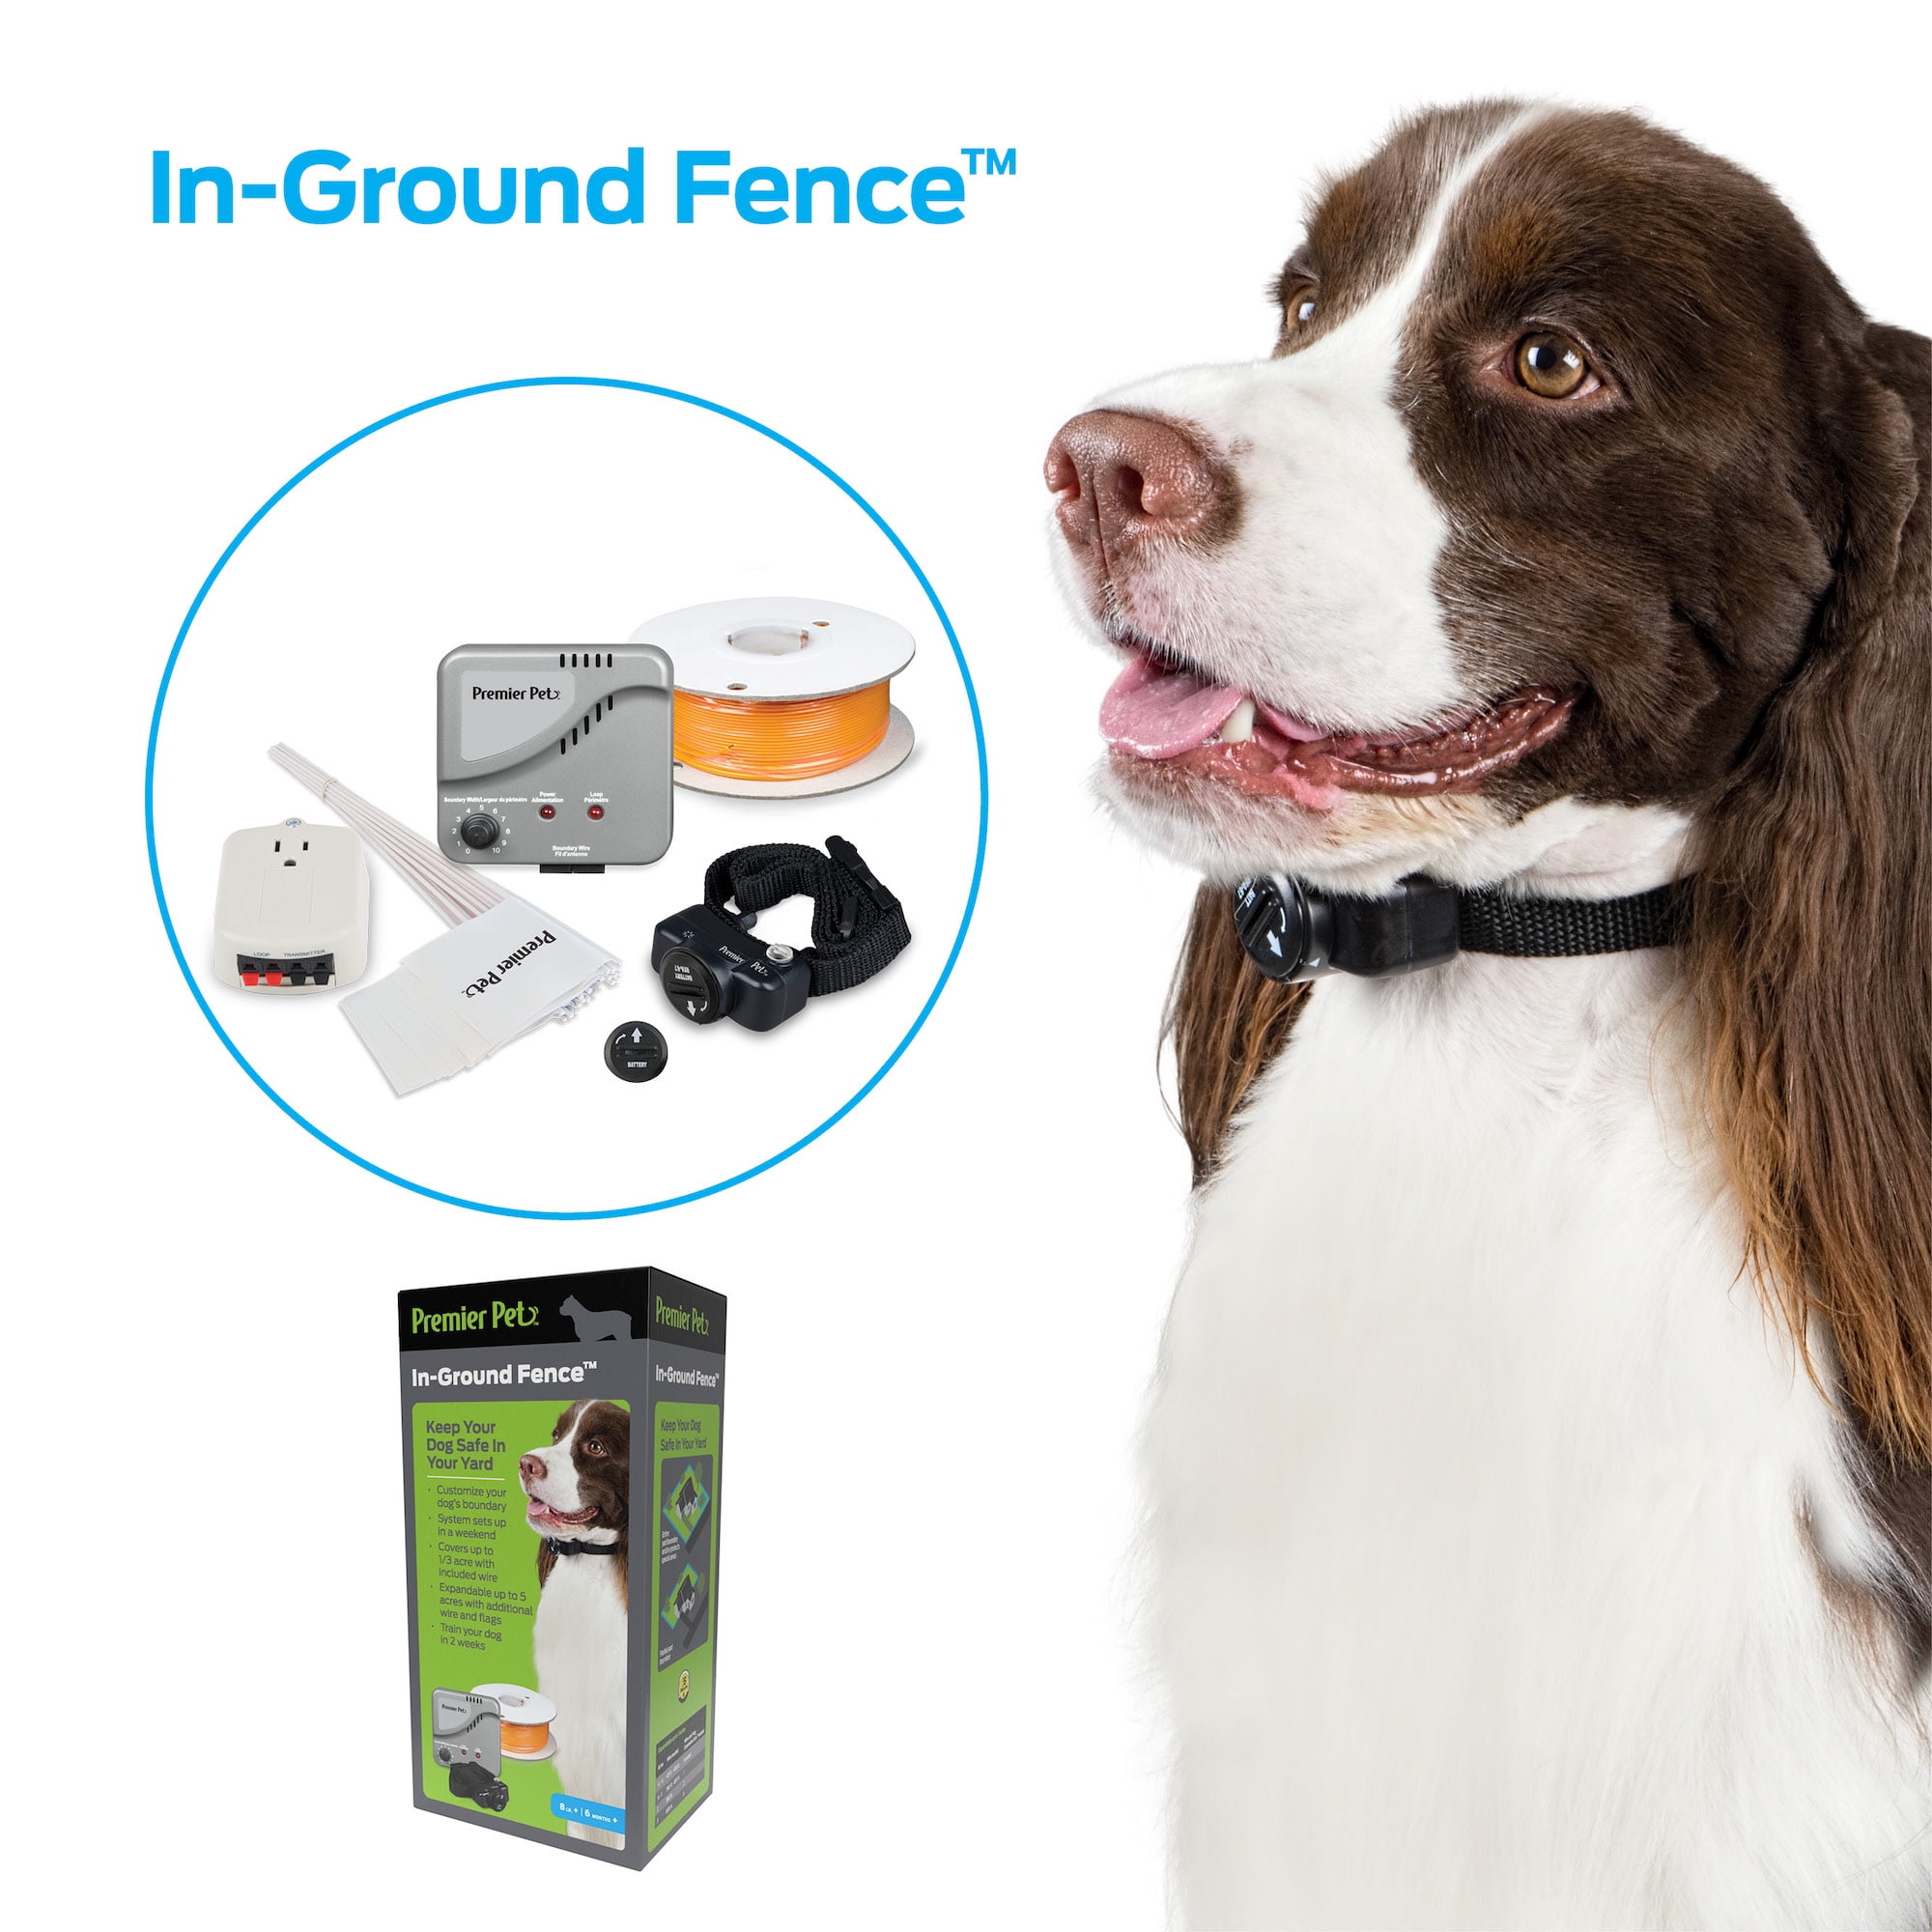 In-Ground Fence™ System - Premier Pet